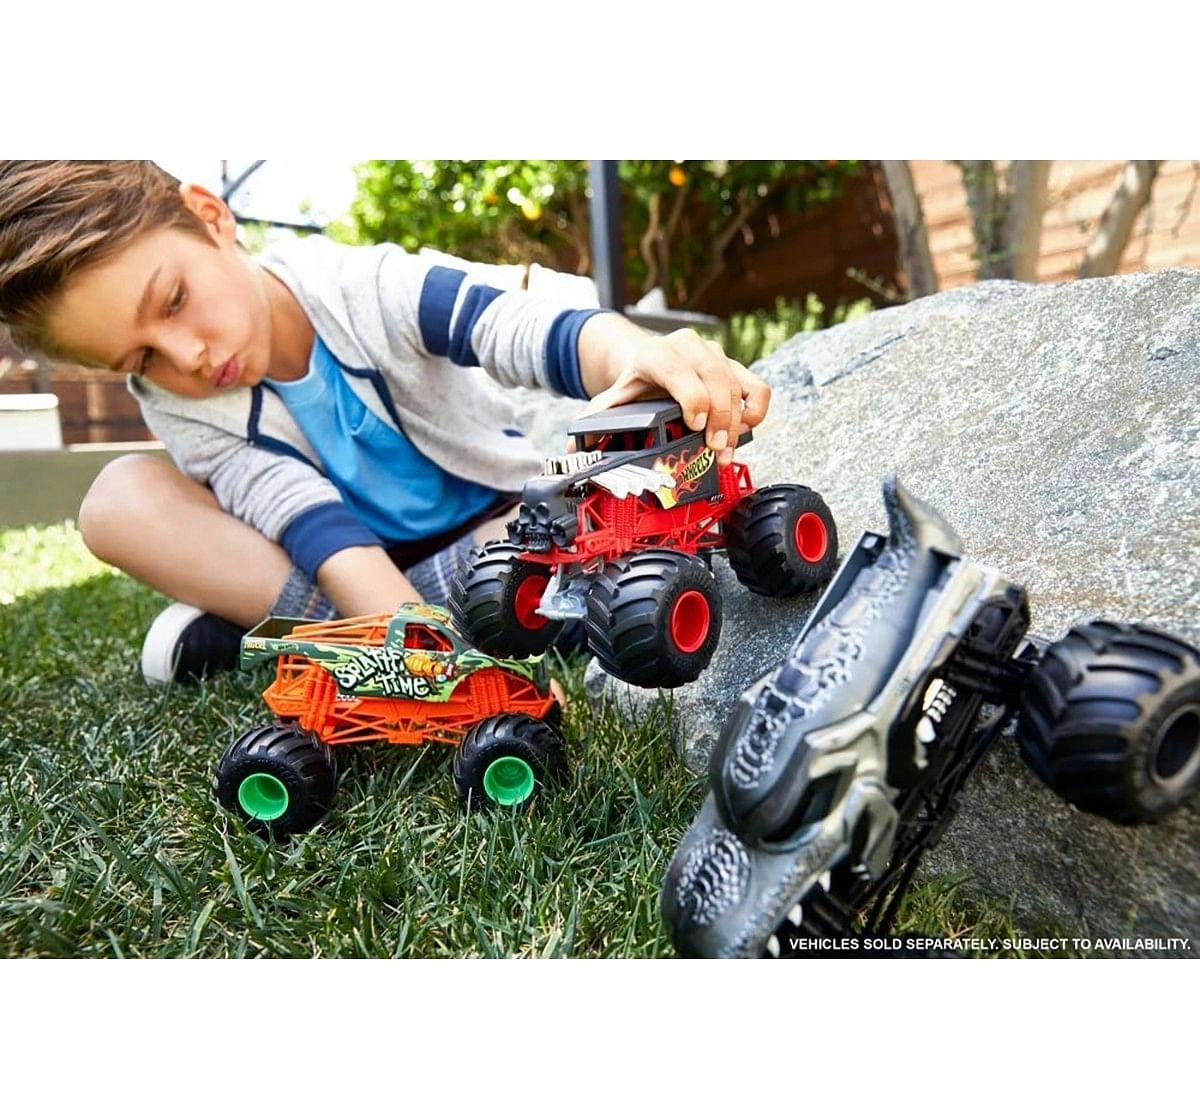 Hot Wheels 1:24 Monster Trucks Vehicles for Kids age 3Y+, Assorted